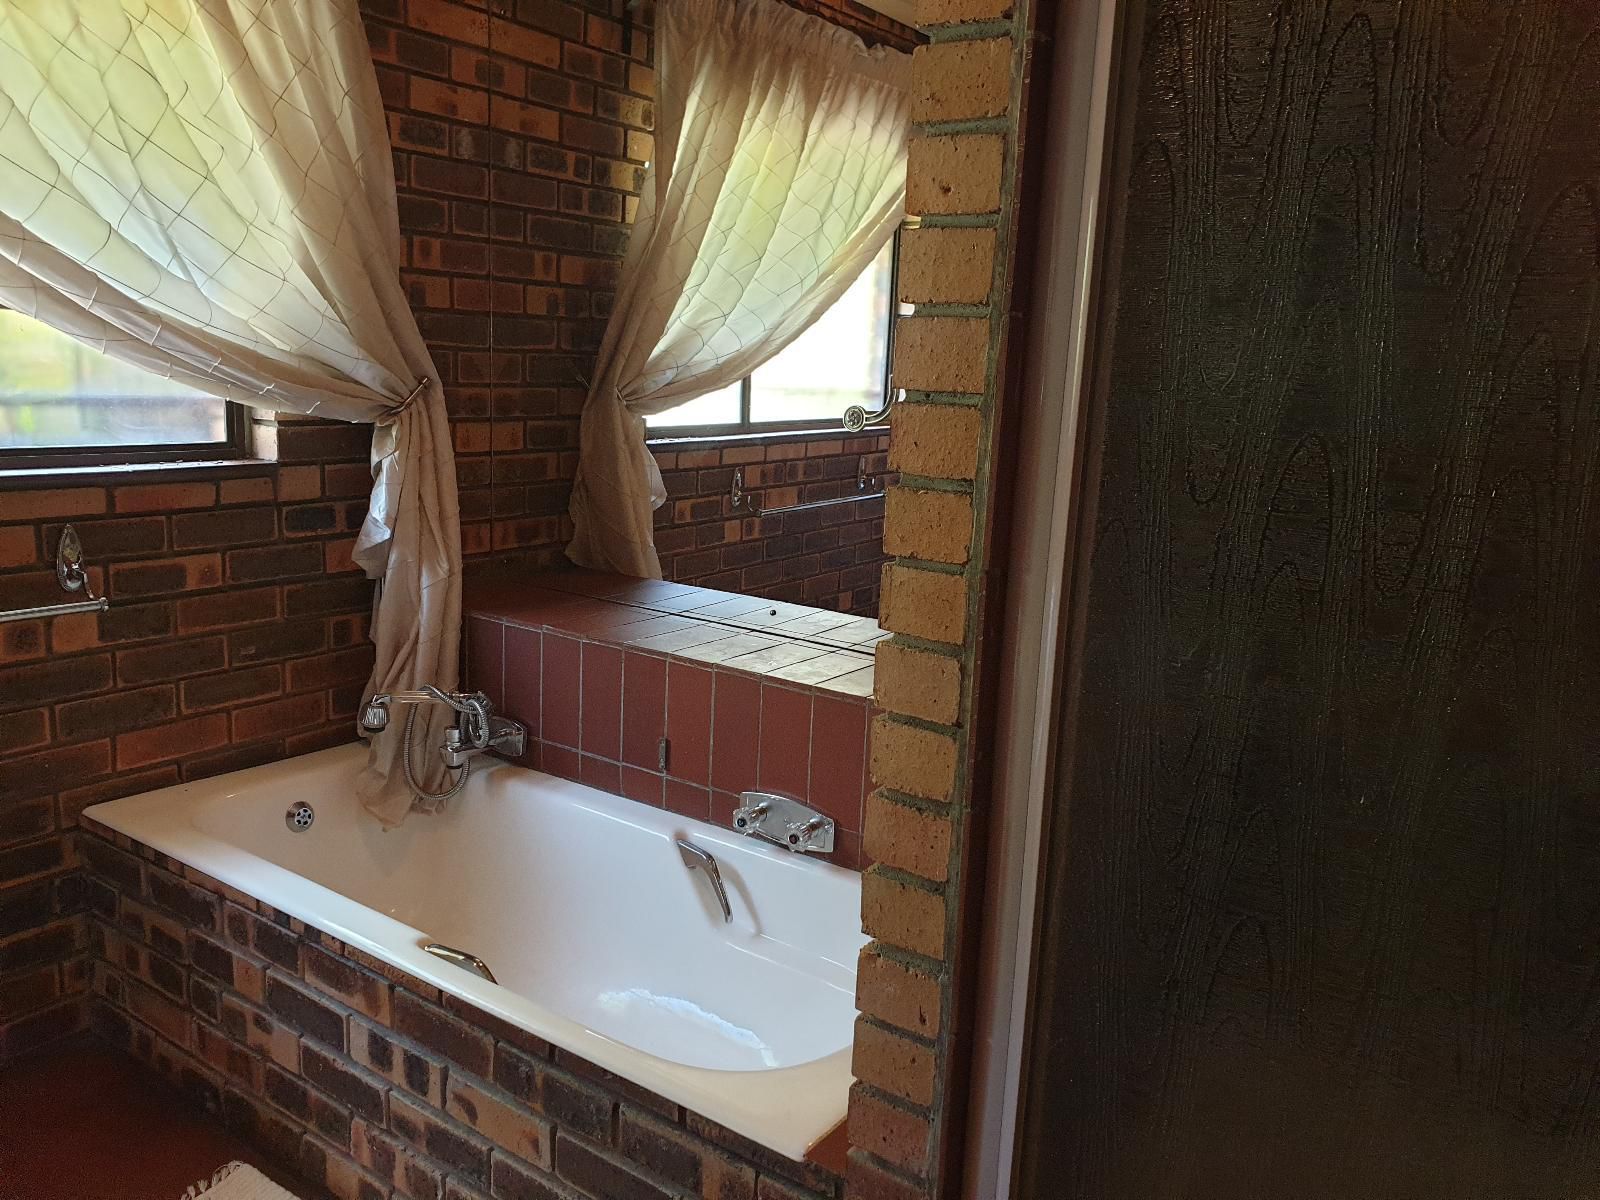 The Guesthouse Secunda Mpumalanga South Africa Wall, Architecture, Bathroom, Brick Texture, Texture